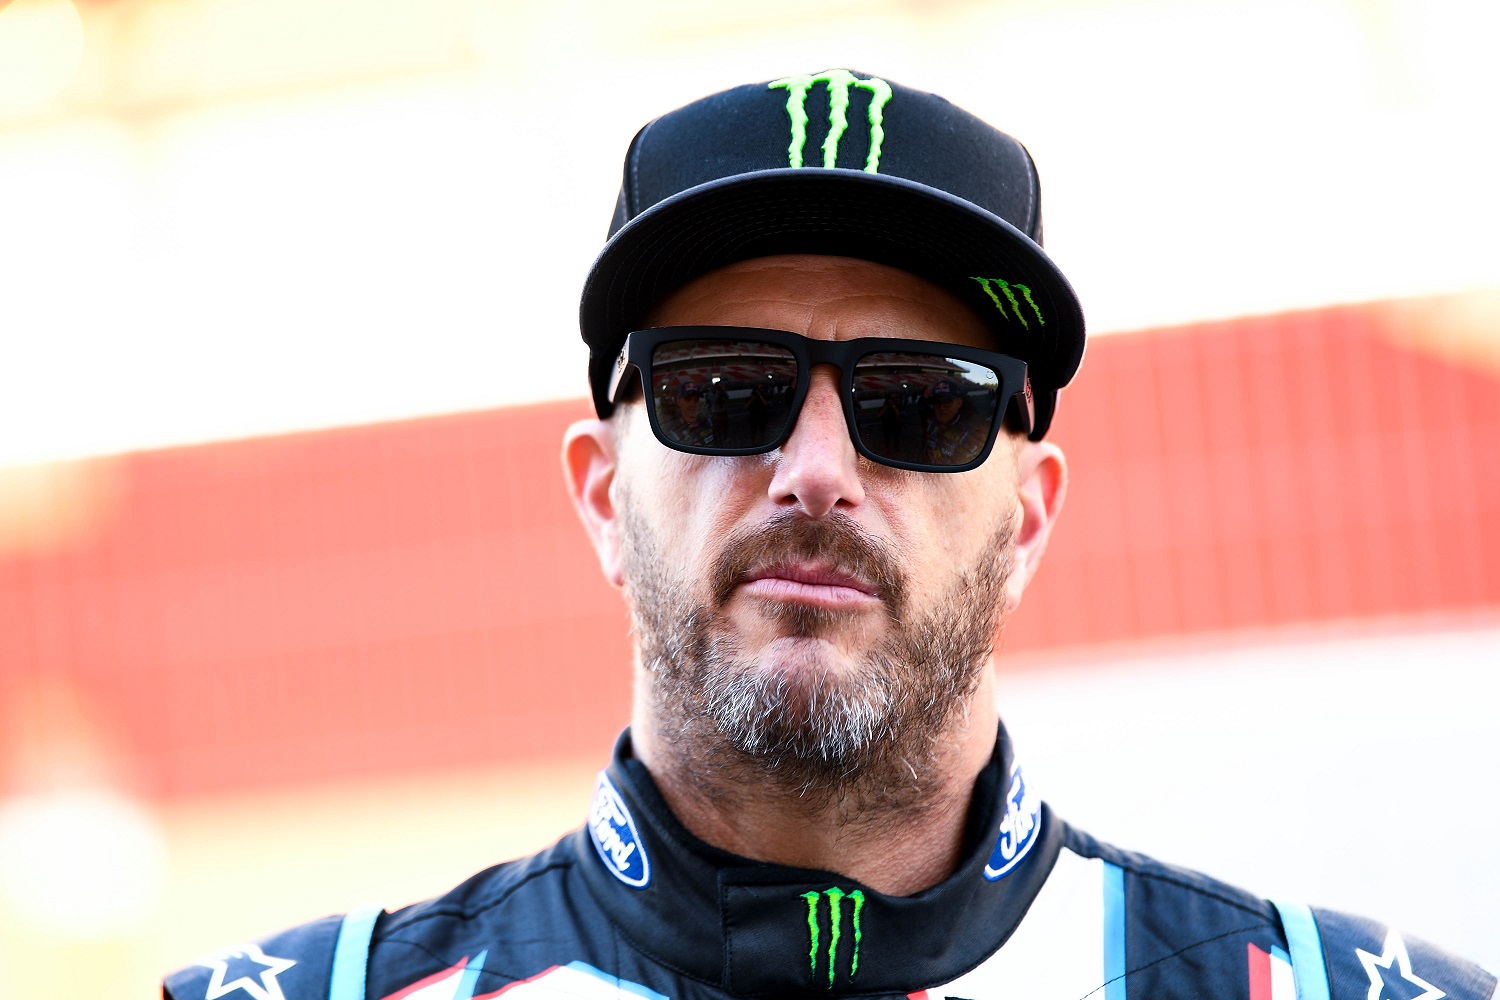 Ken Block of Hoonigan Racing looks on during the launch event of the FIA World Rallycross Championship at Circuit de Catalunya in Barcelona on March 30, 2017.